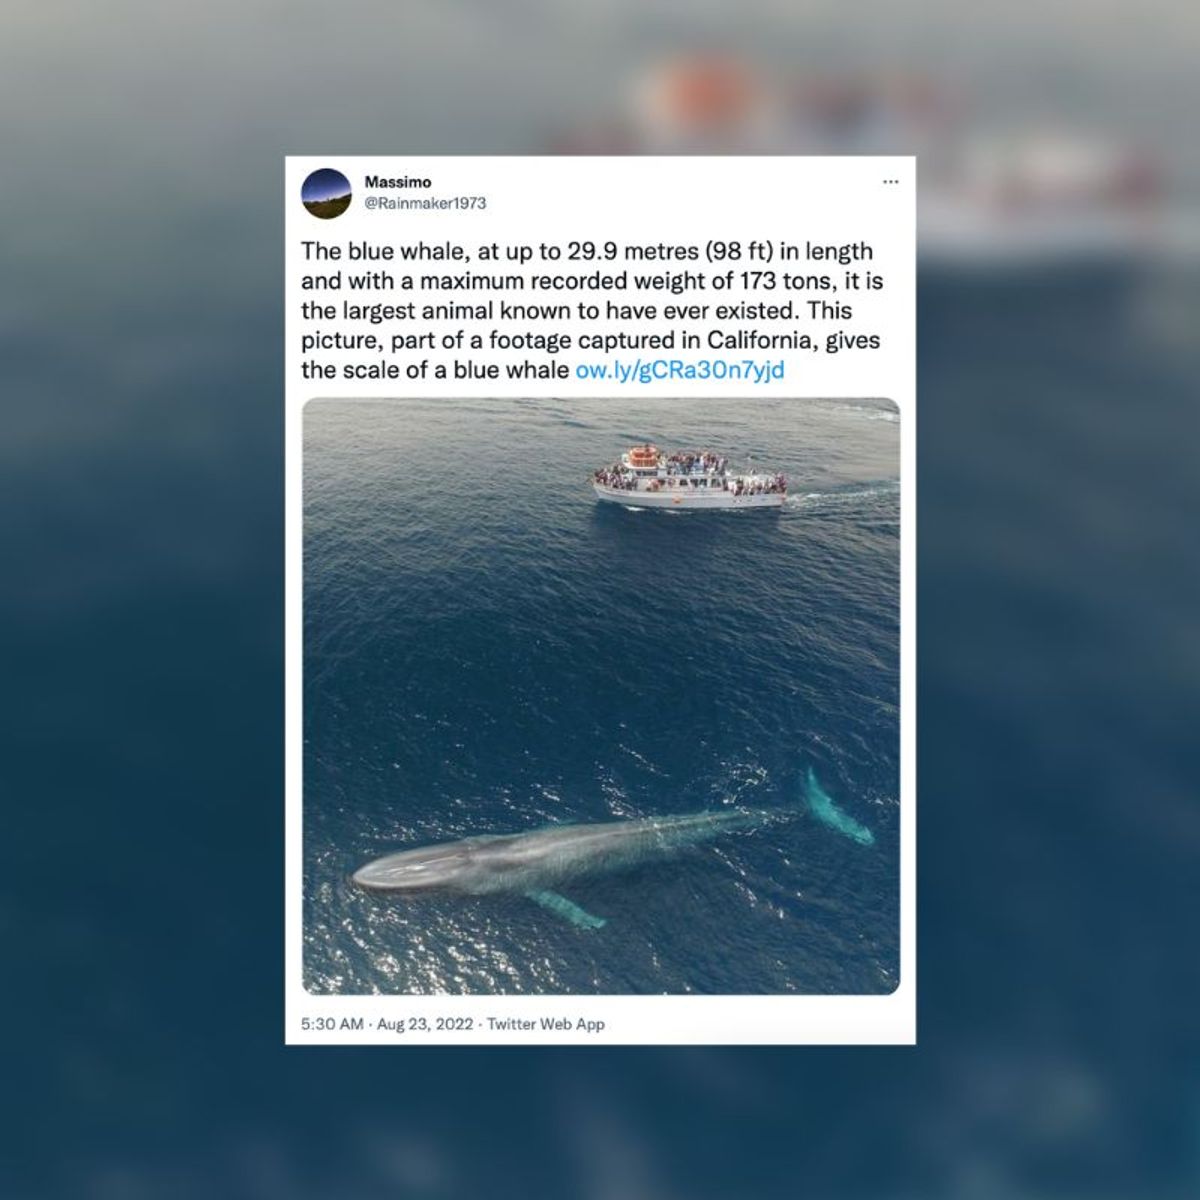 Does this Photo Authentically Show a Whale Alongside a Boat? 